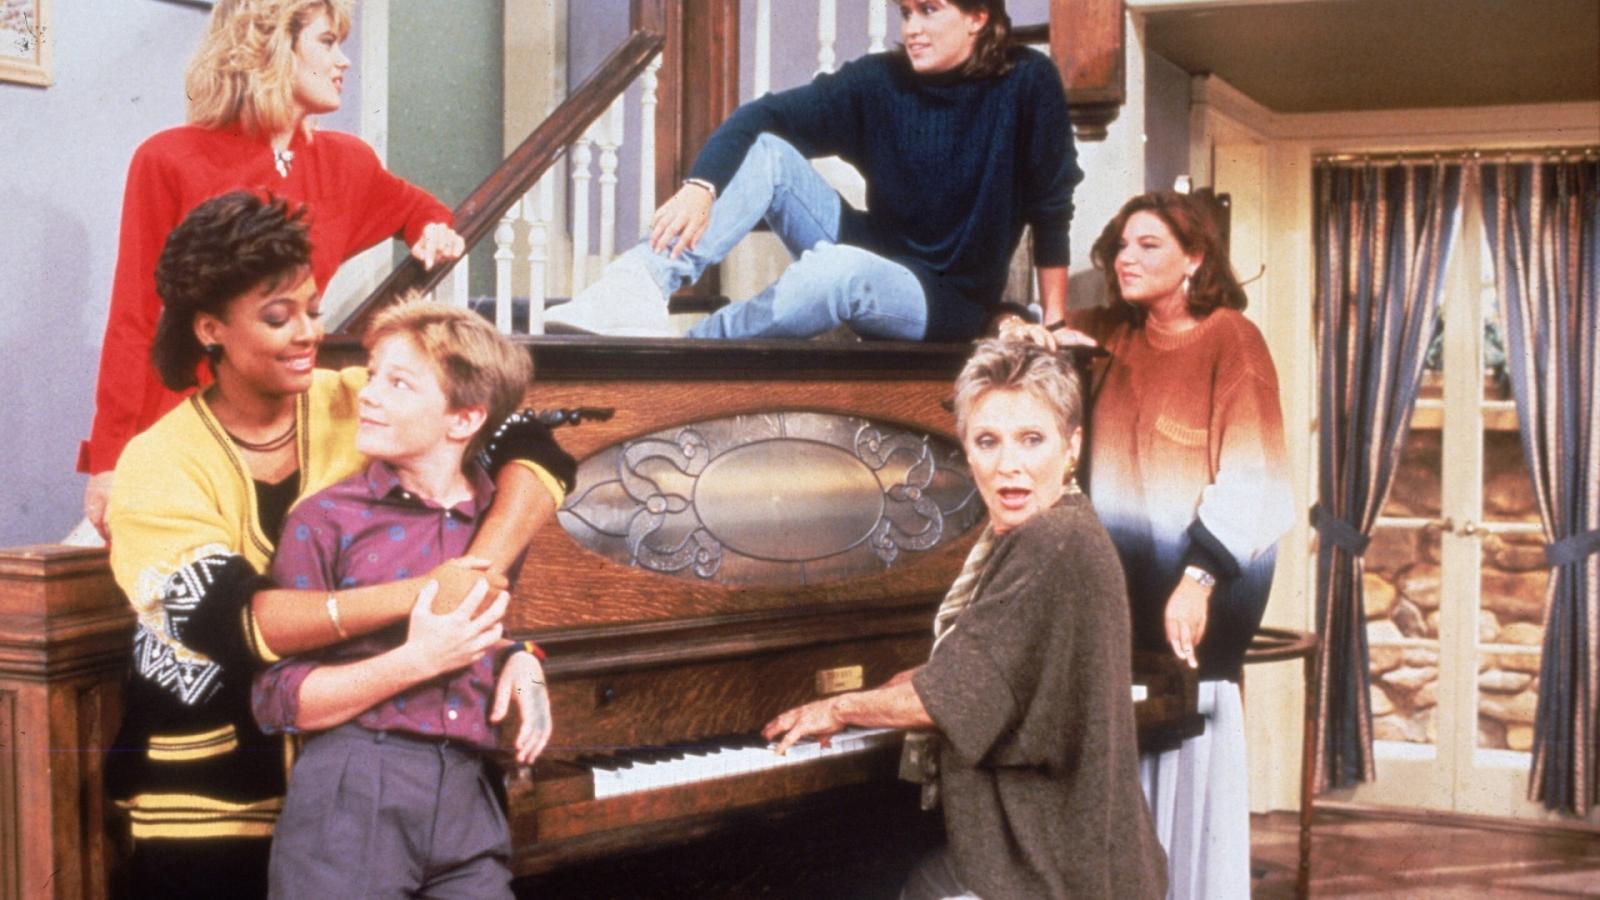 15 Vintage '80s Shows That Are More Binge-Worthy Than Today's Hits - image 12